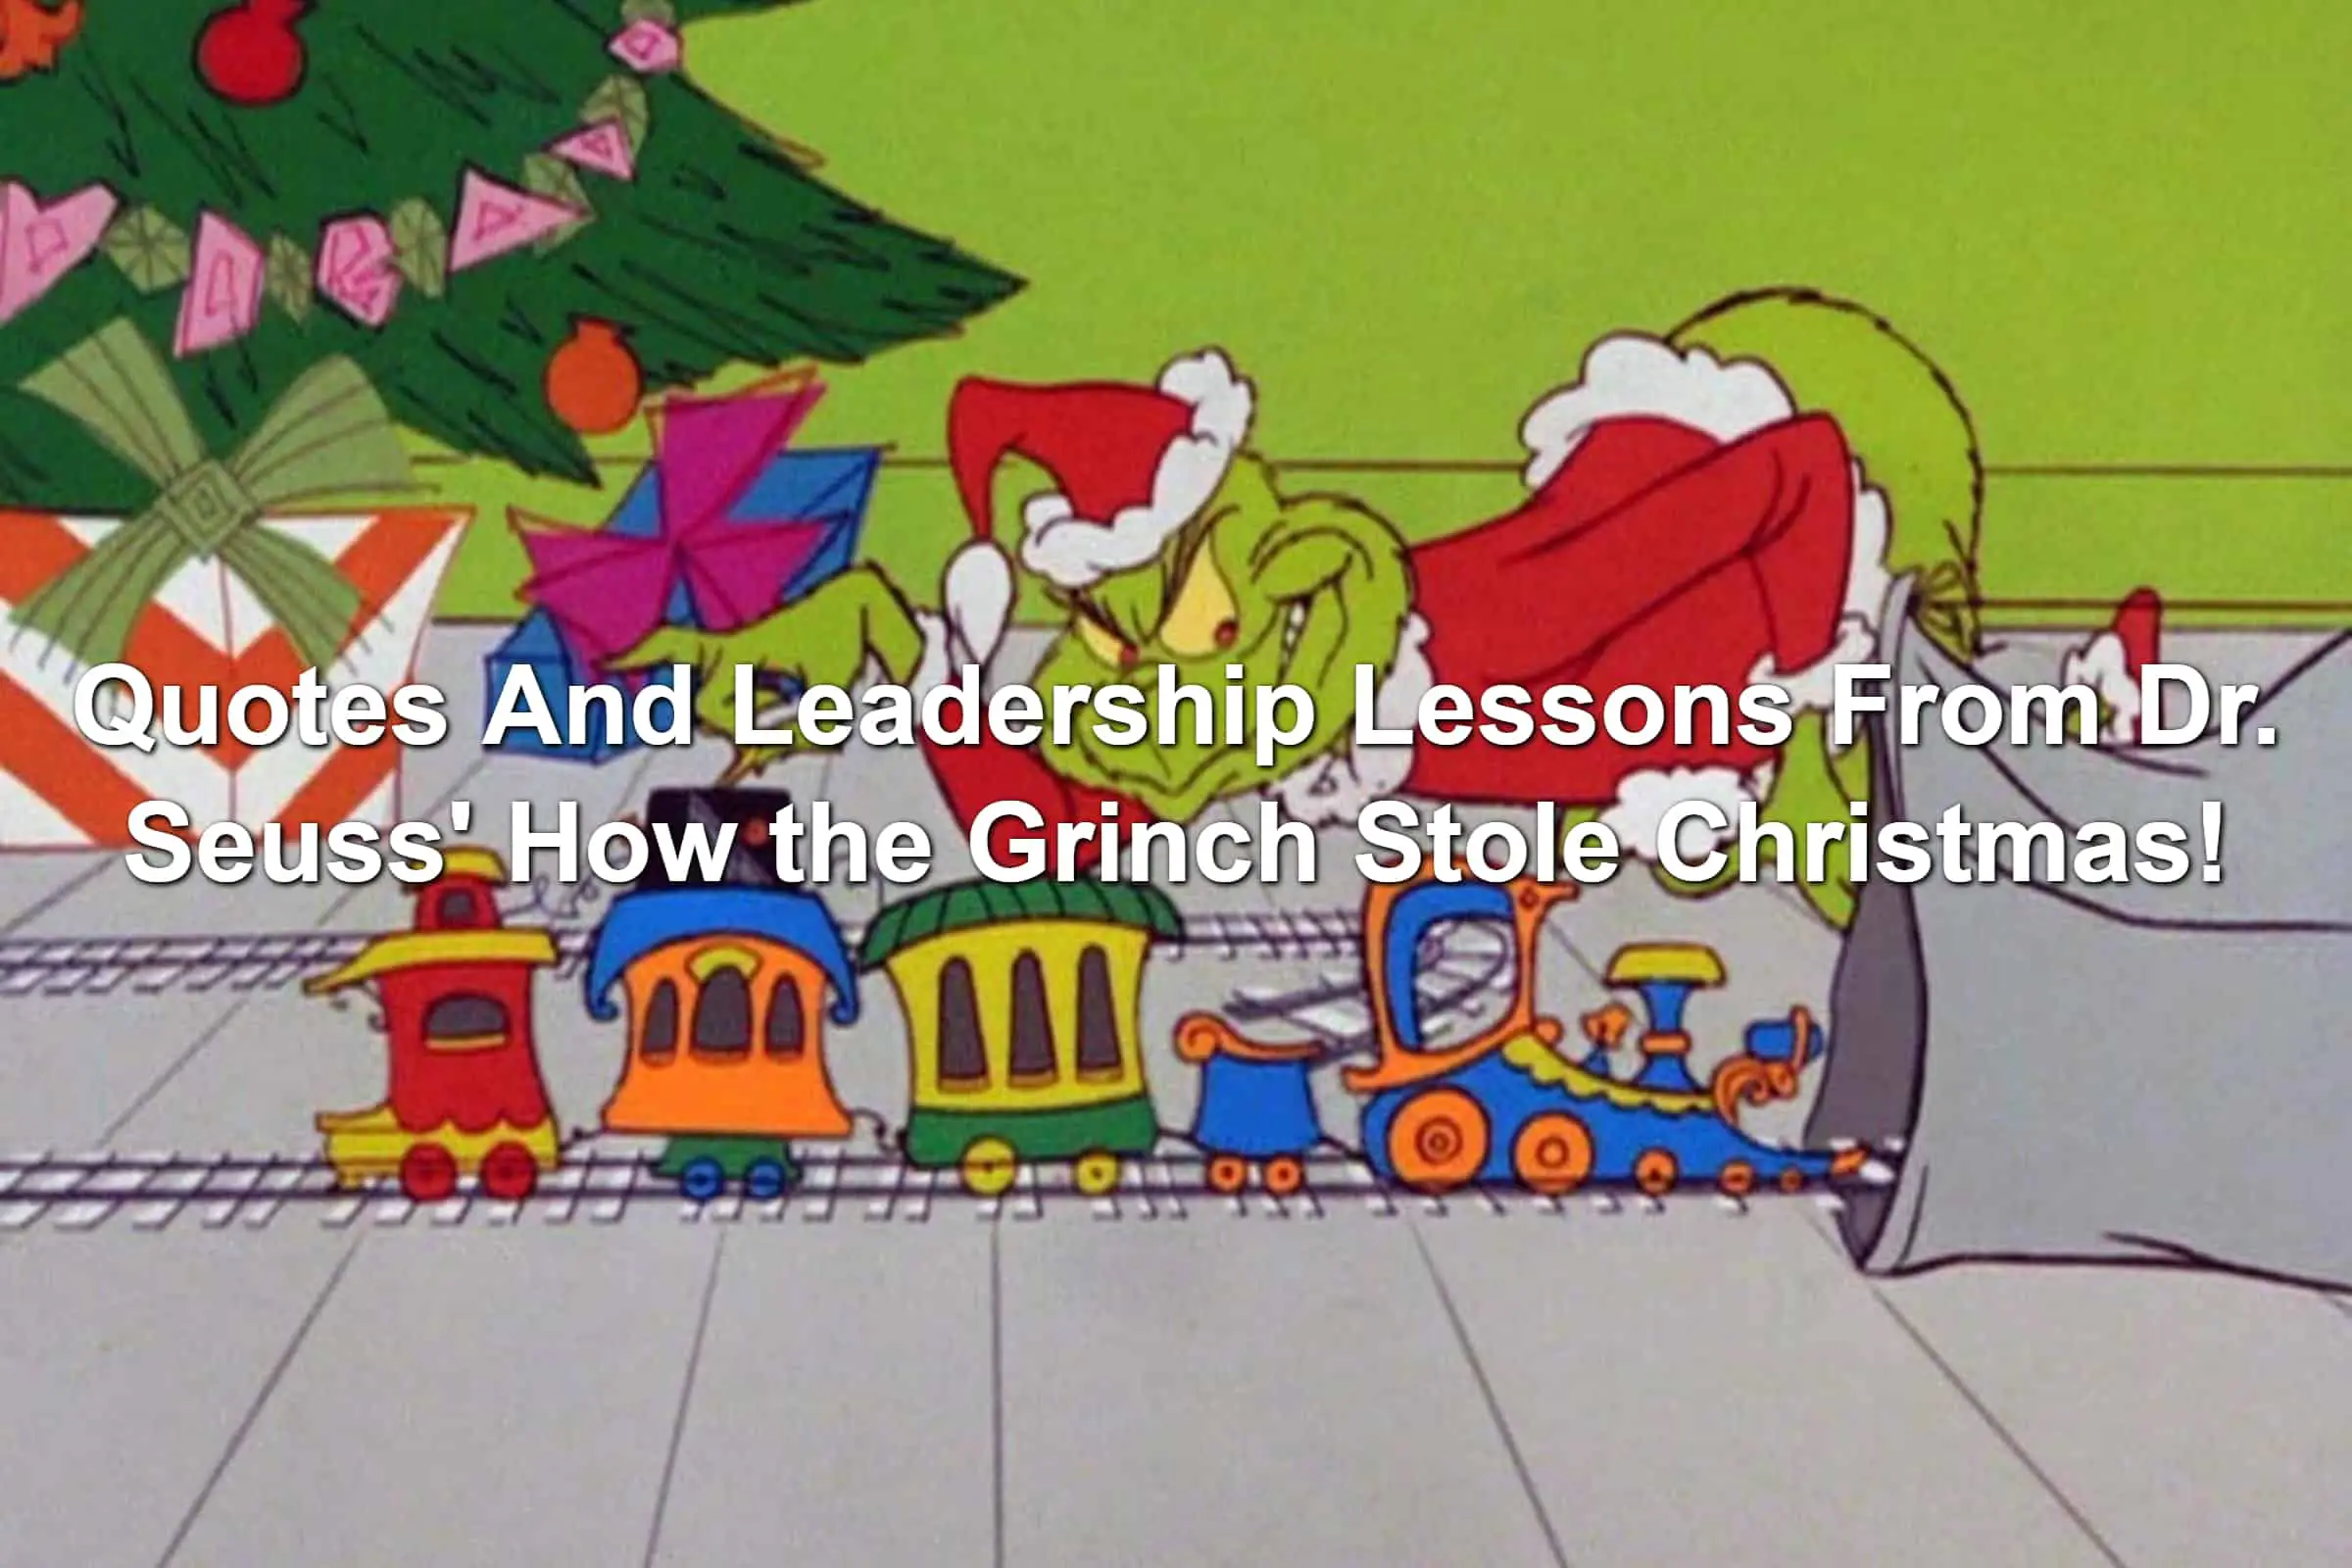 The Grinch in a Santa Claus outfit stealing a toy train set from underneath a tree.